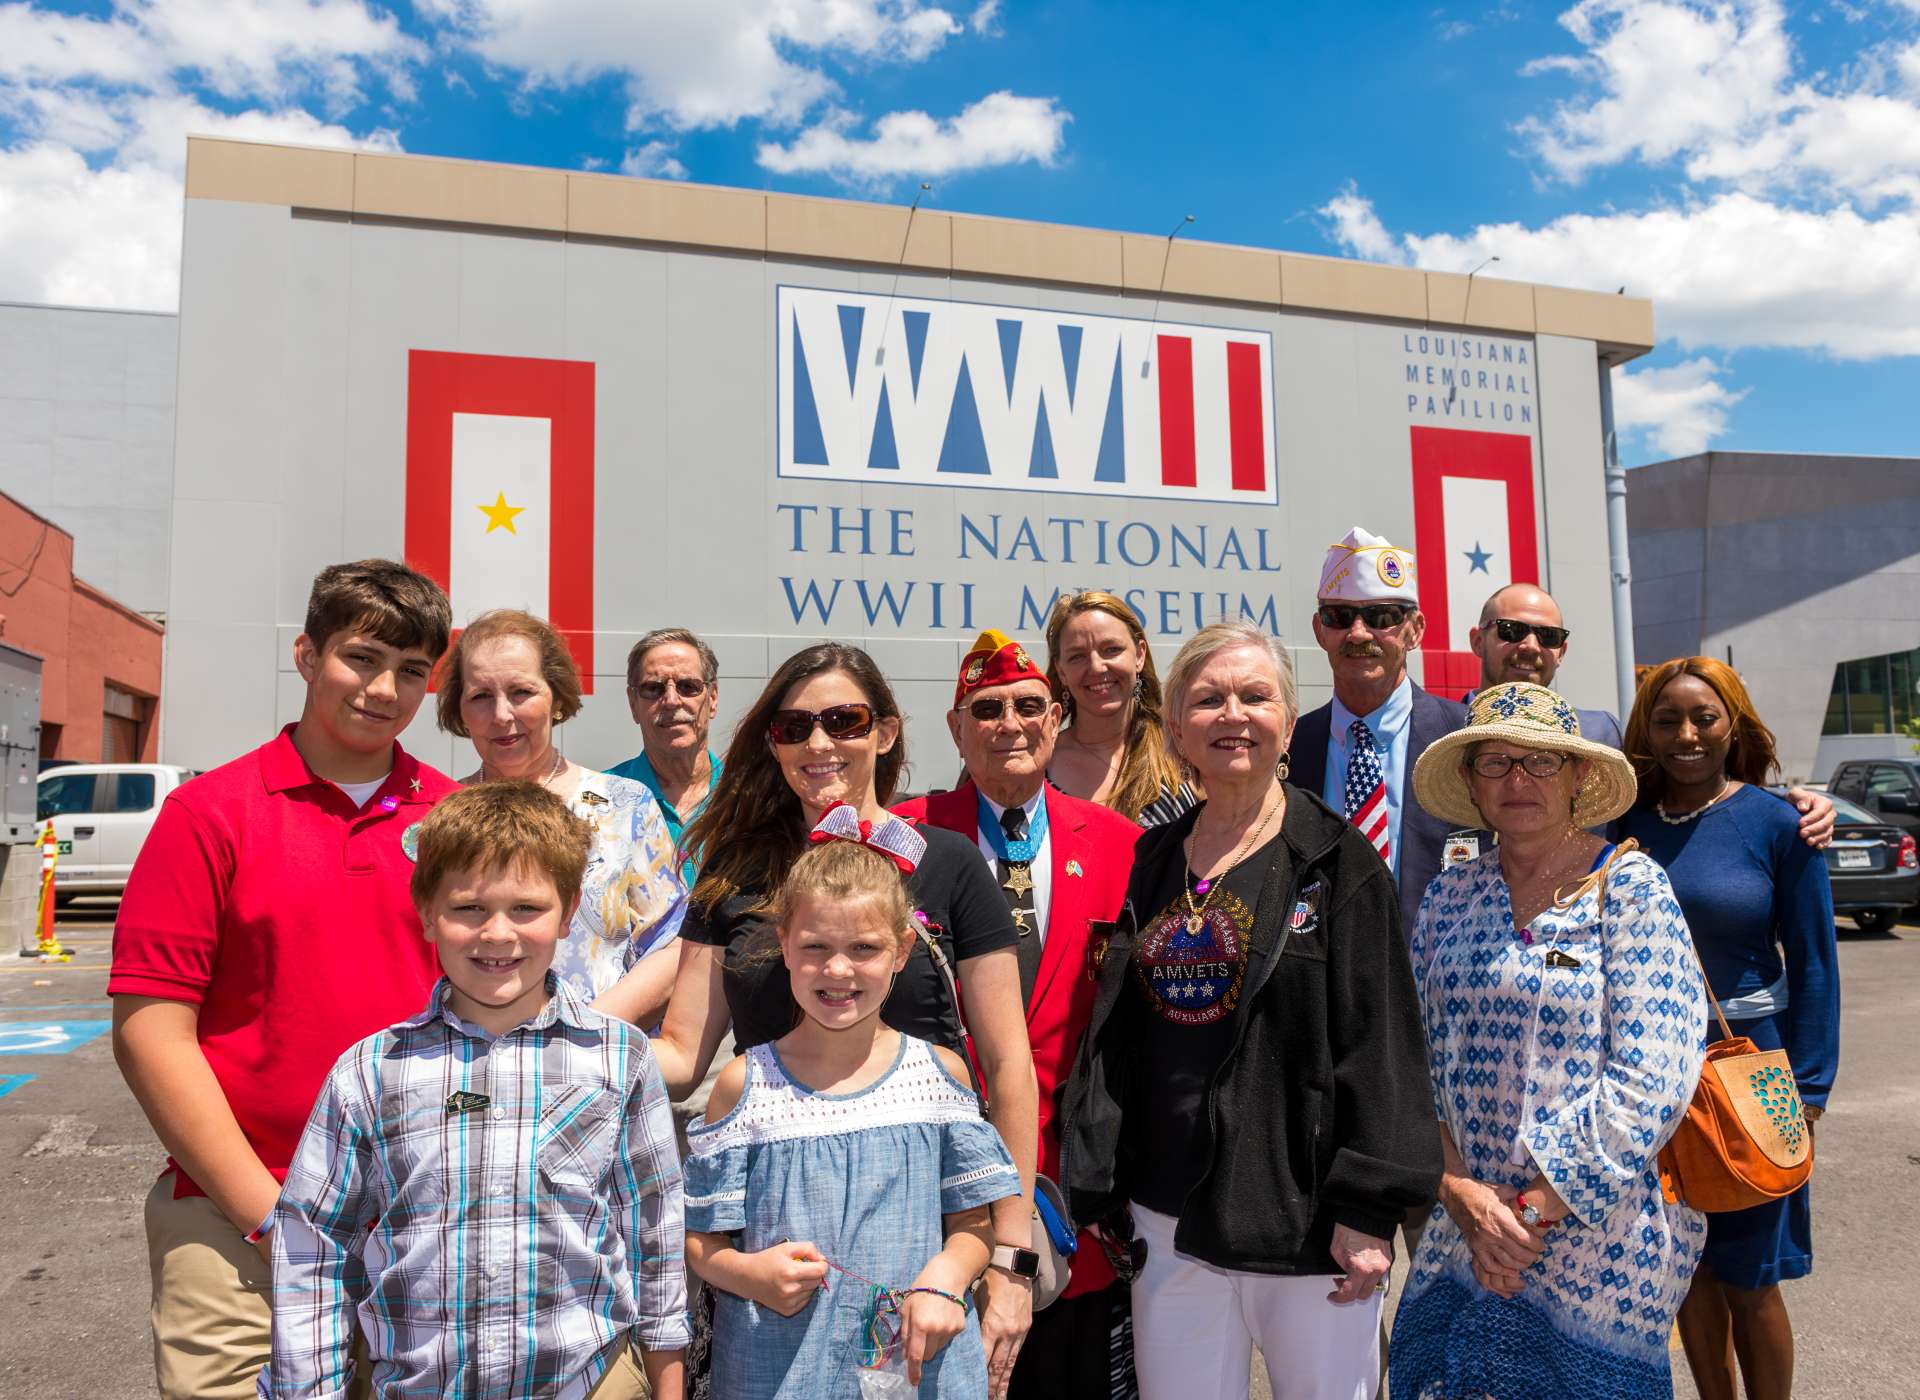 Military reunions at The National WWII Museum